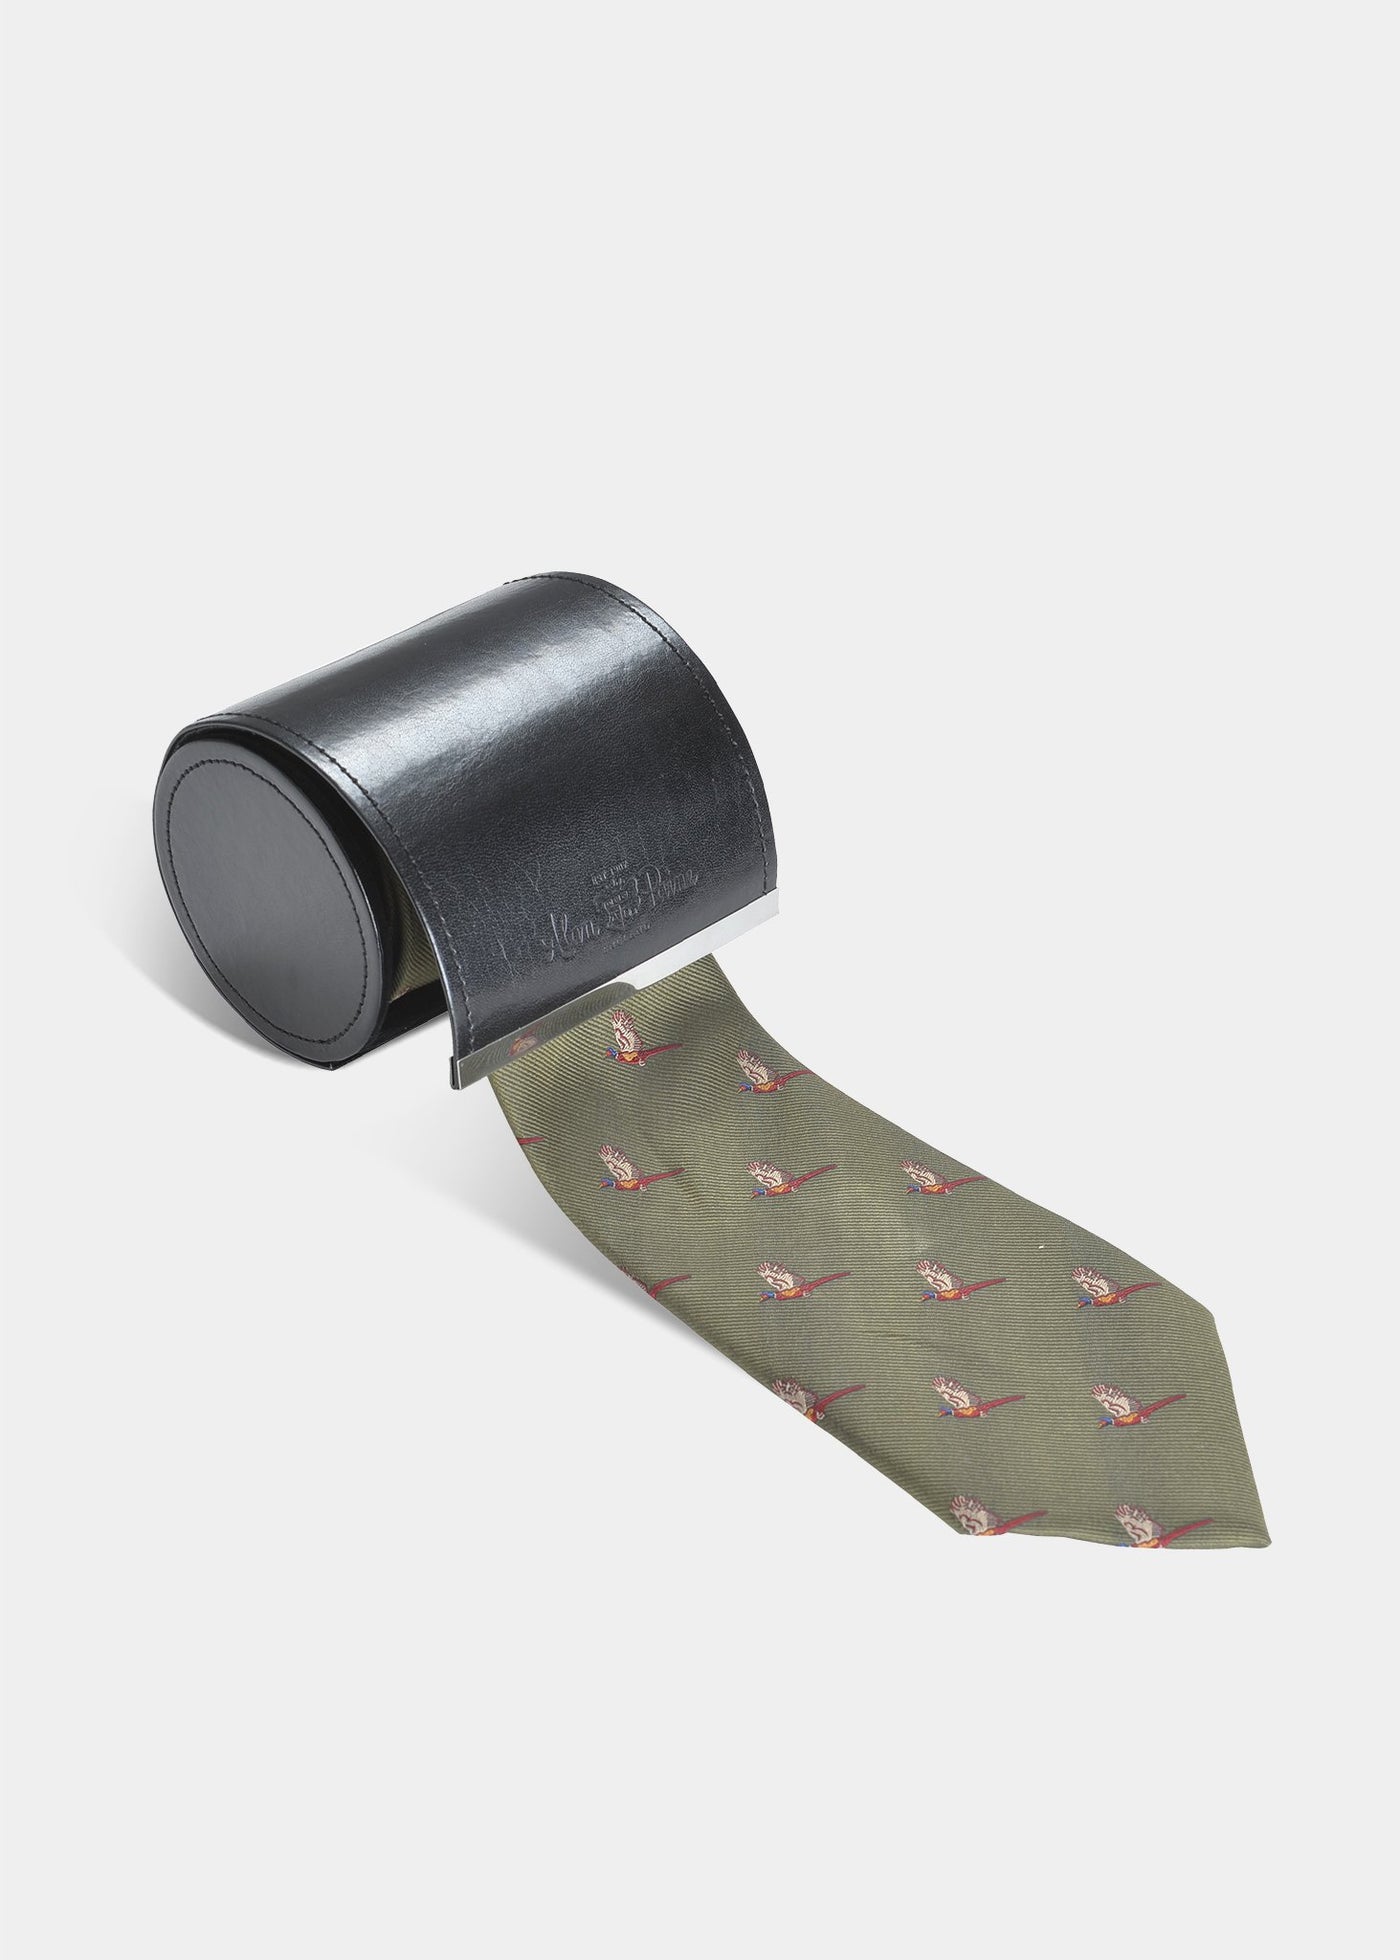 mens-ripon-silk-country-tie-flying-pheasant-design-olive_1400x